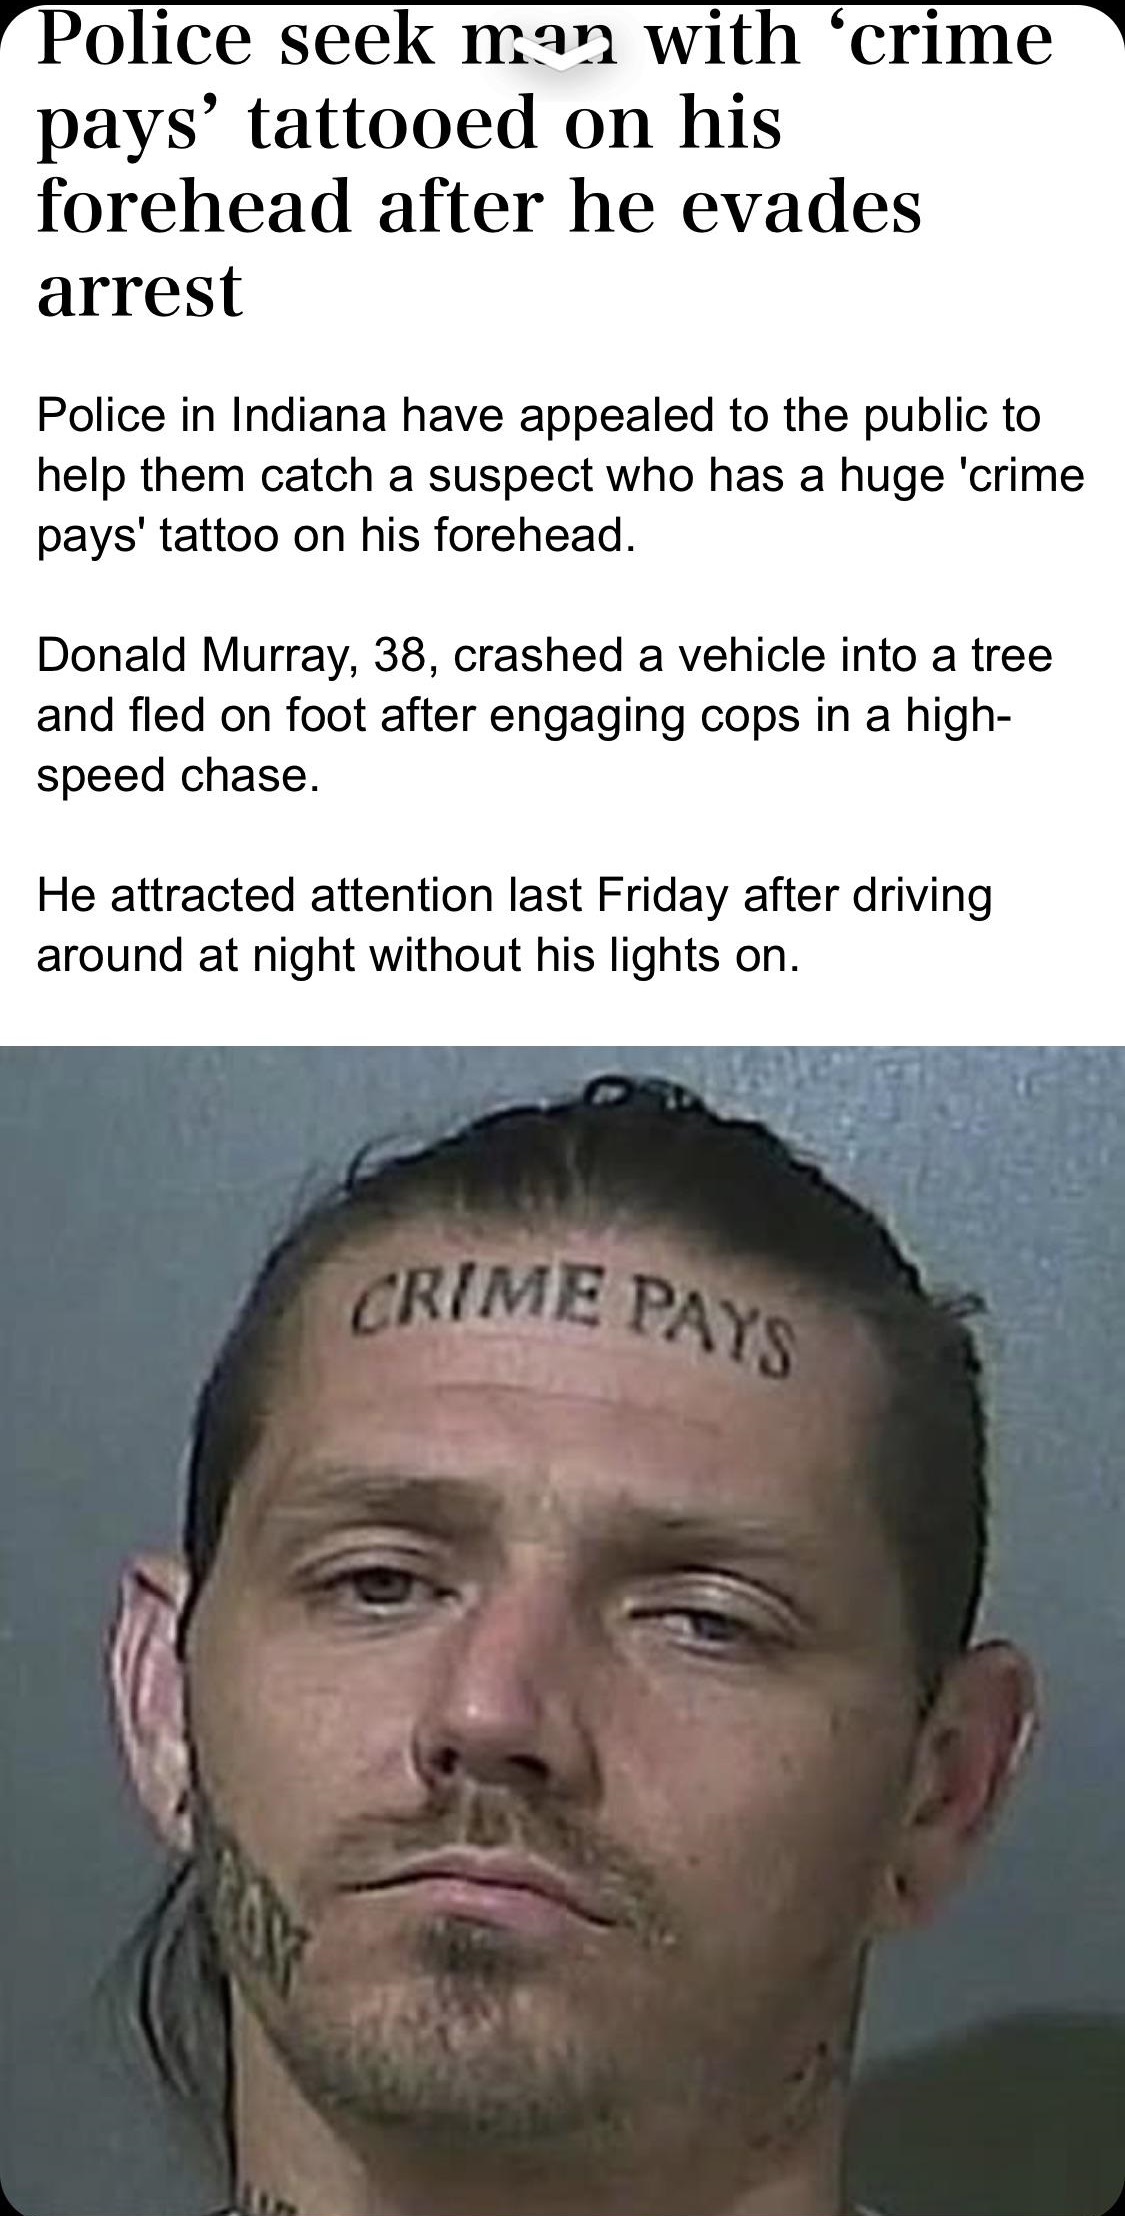 jaw - Police seek man with 'crime pays' tattooed on his forehead after he evades arrest Police in Indiana have appealed to the public to help them catch a suspect who has a huge 'crime pays' tattoo on his forehead. Donald Murray, 38, crashed a vehicle int